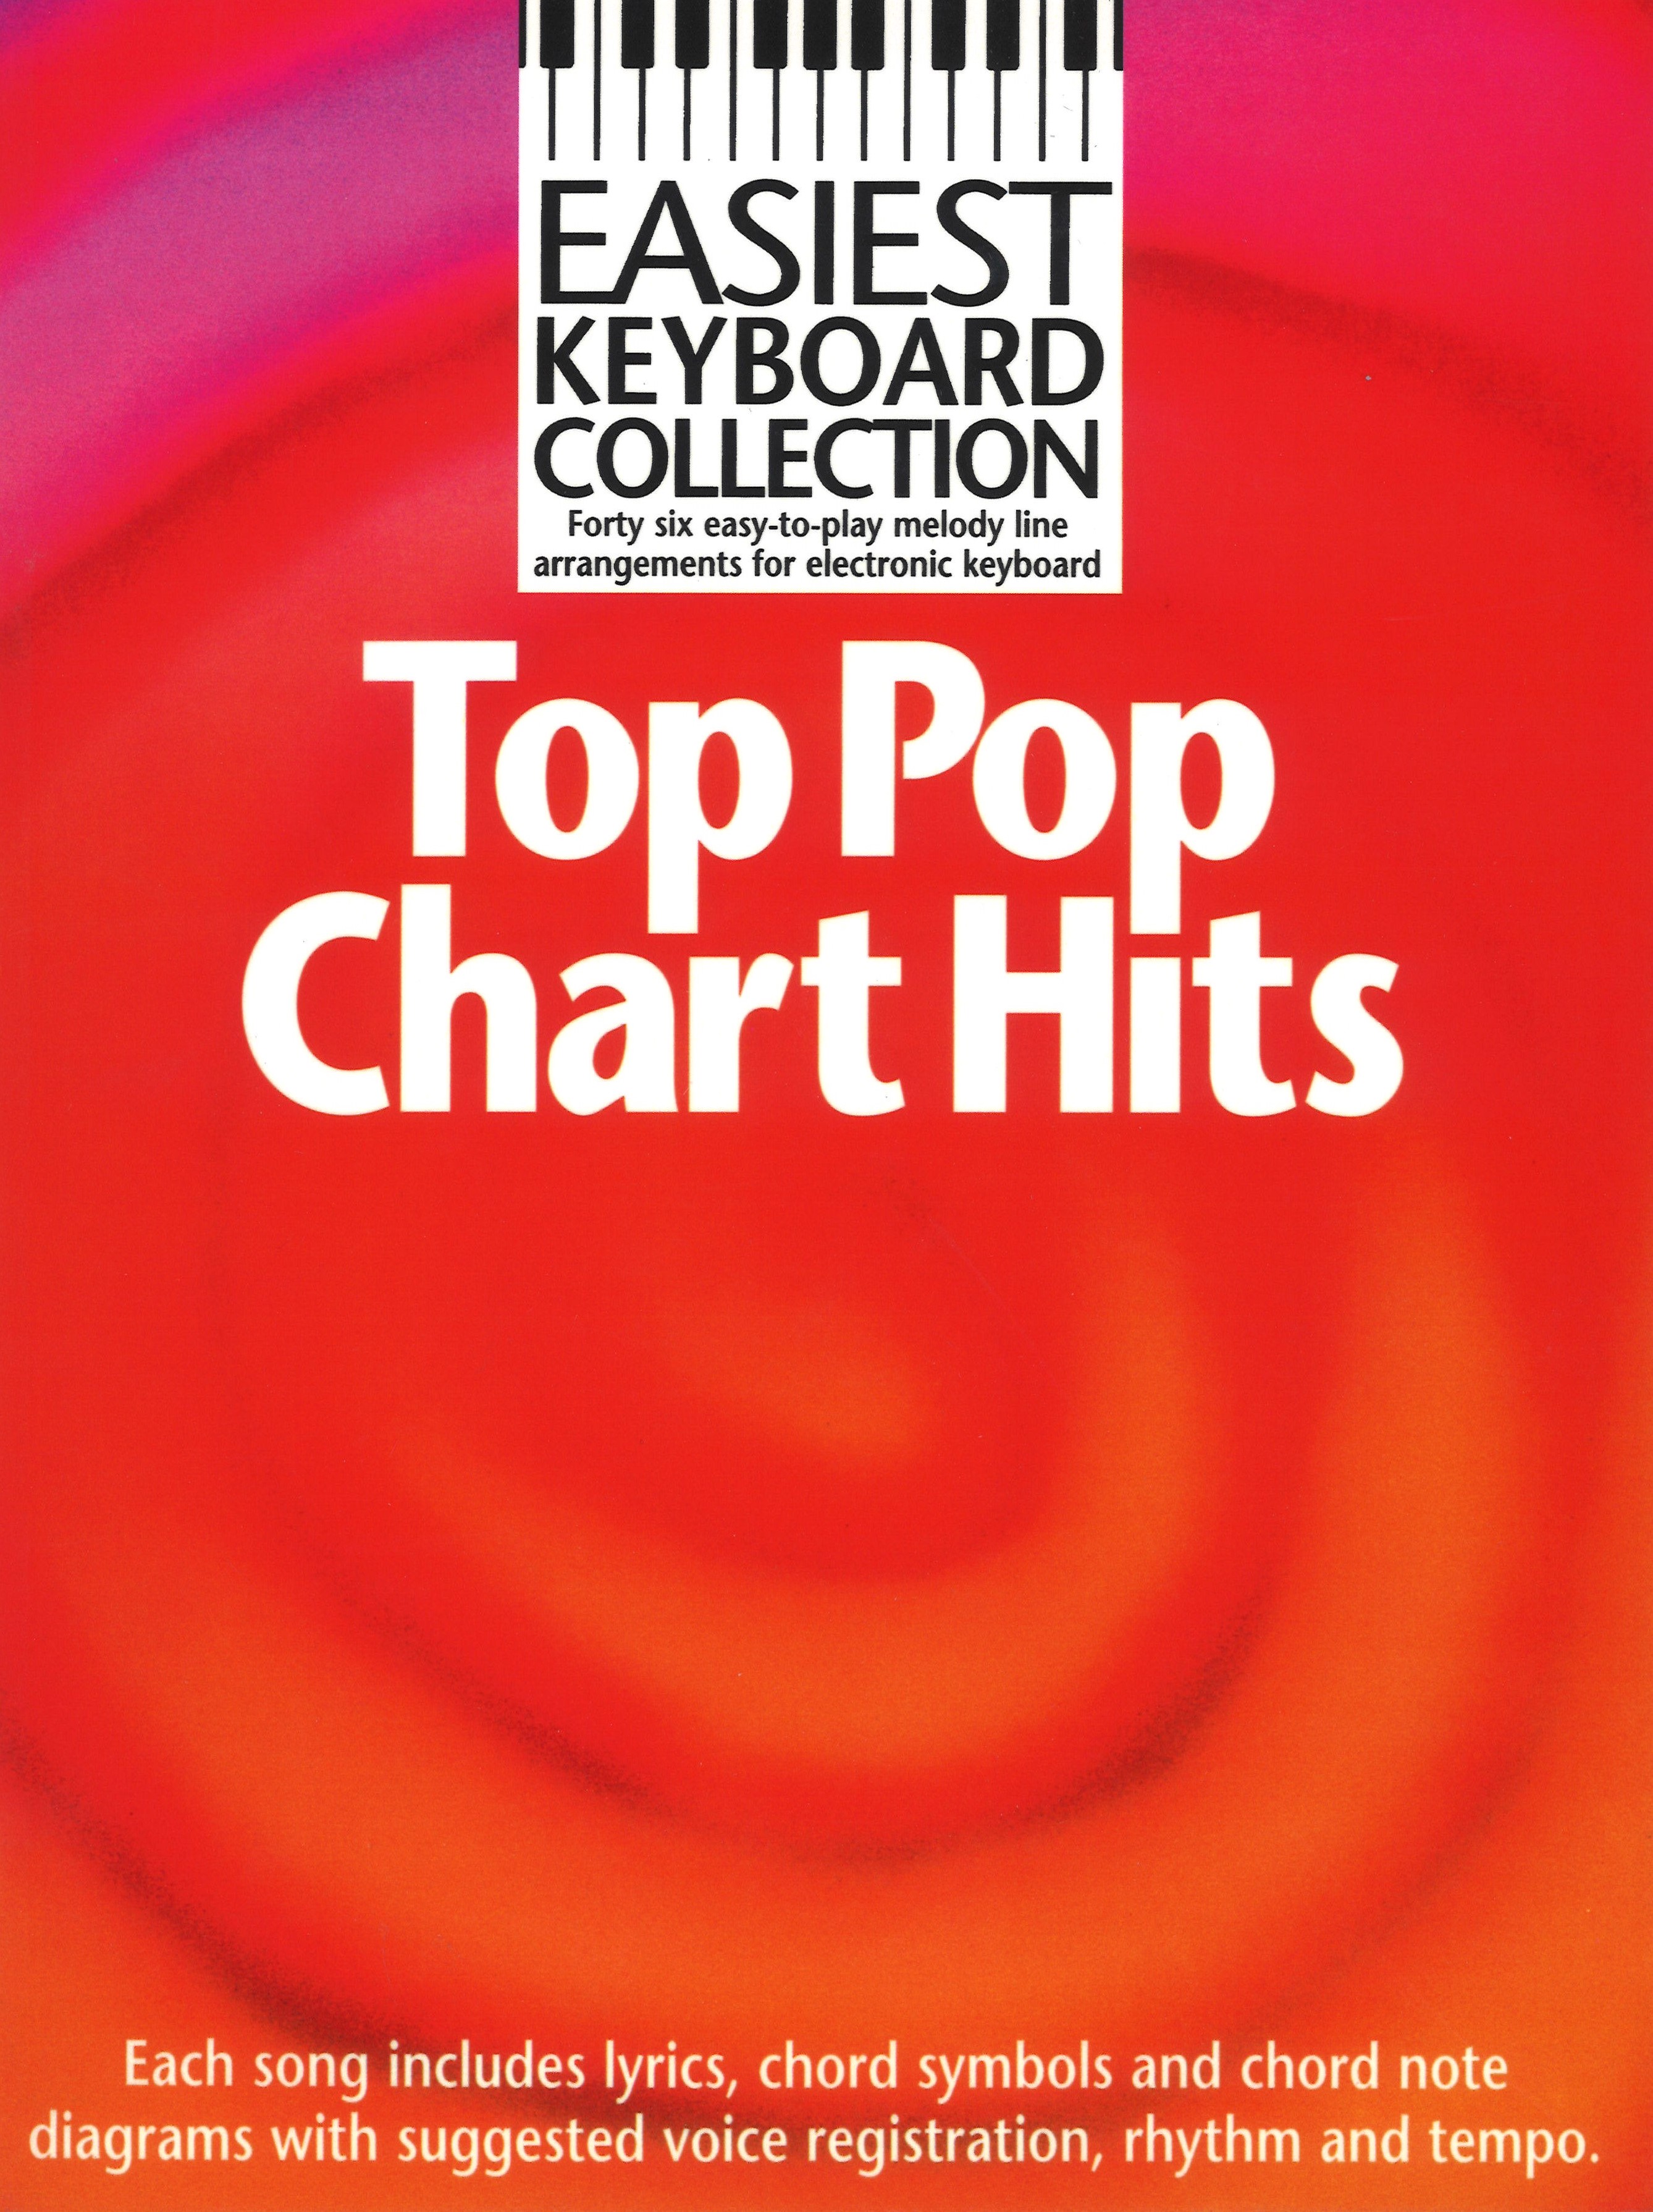 Easiest Keyboard Collection Top Pop Chart Hits Sheet Music Songbook